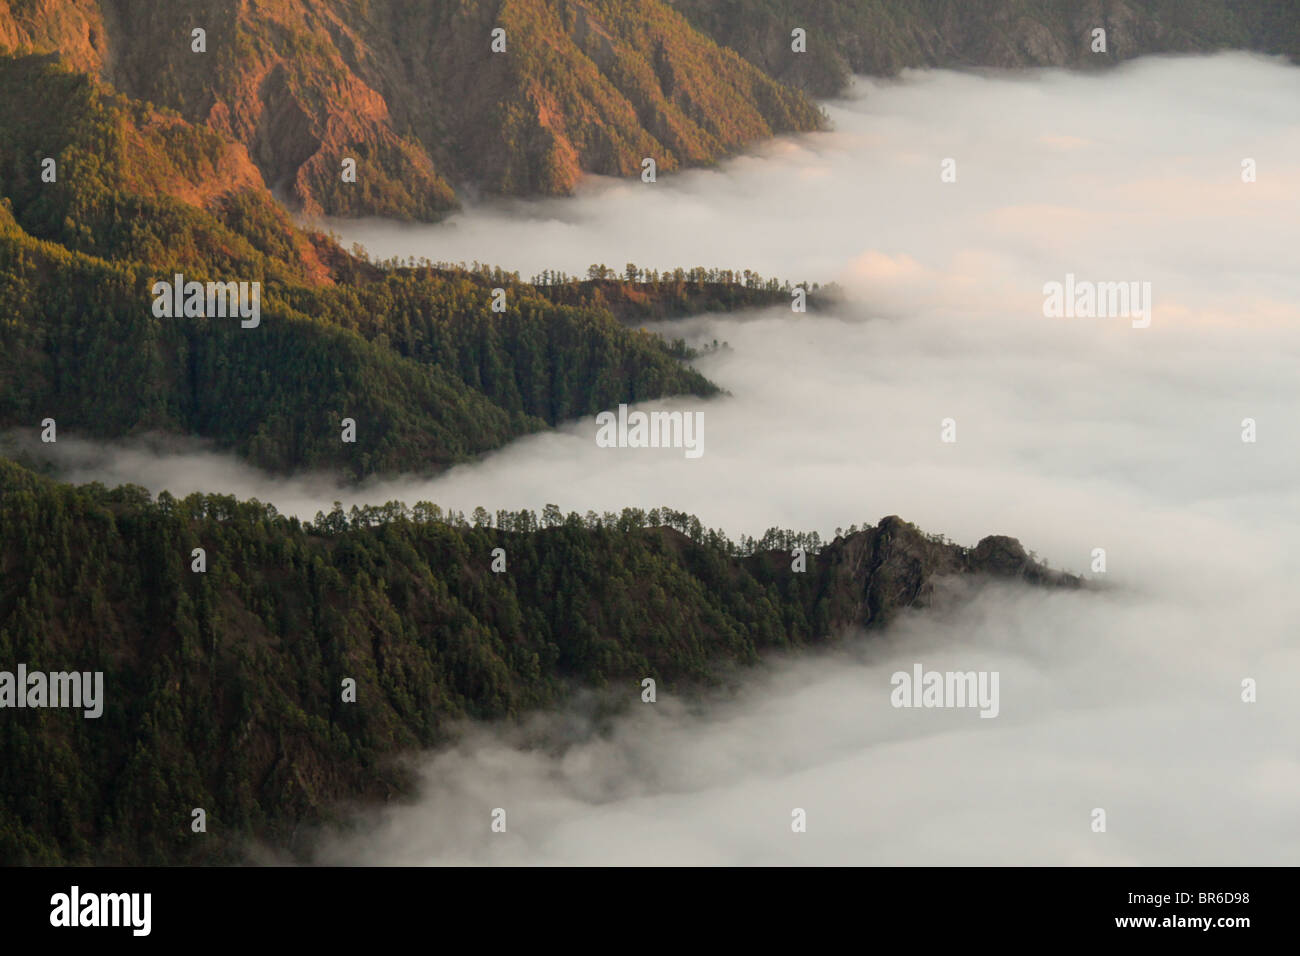 Mountain hillside in the sea of clouds Stock Photo